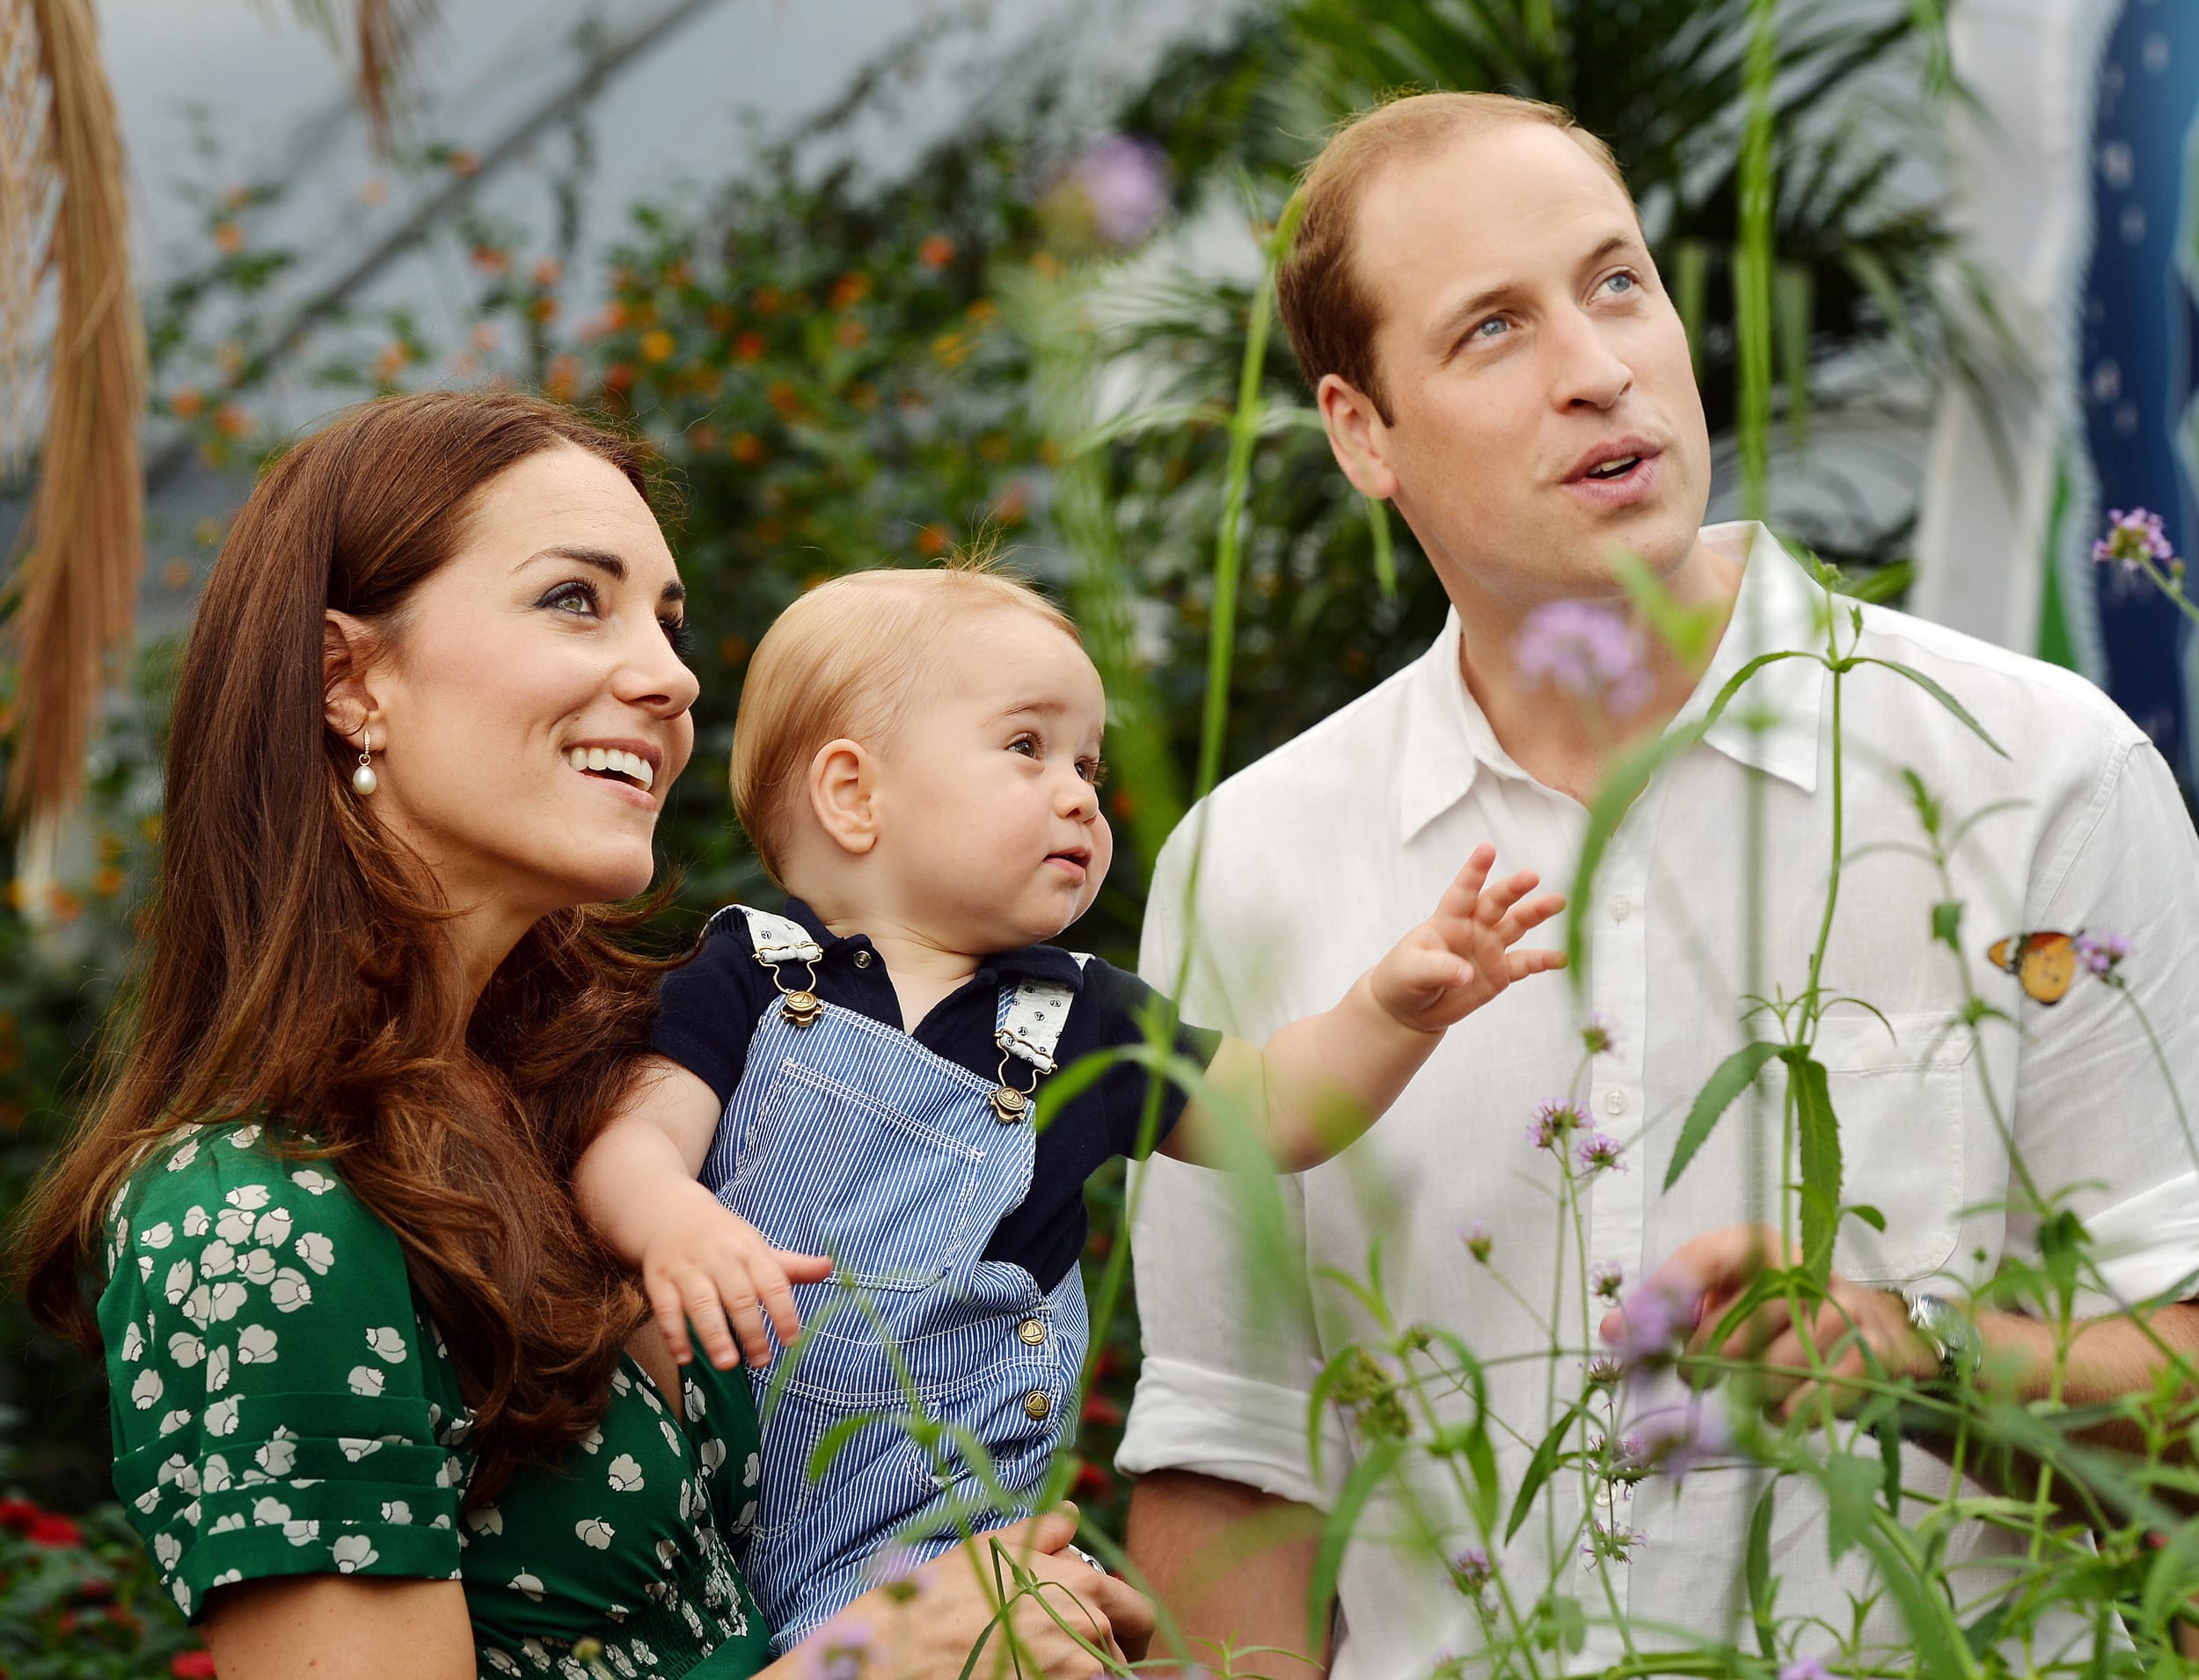 This photo taken July 2 and released Monday shows Britainu2019s Prince William and Kate, Duchess of Cambridge, with their son, Prince George, during a visit to the Sensational Butterflies exhibition at the Natural History Museum in London.